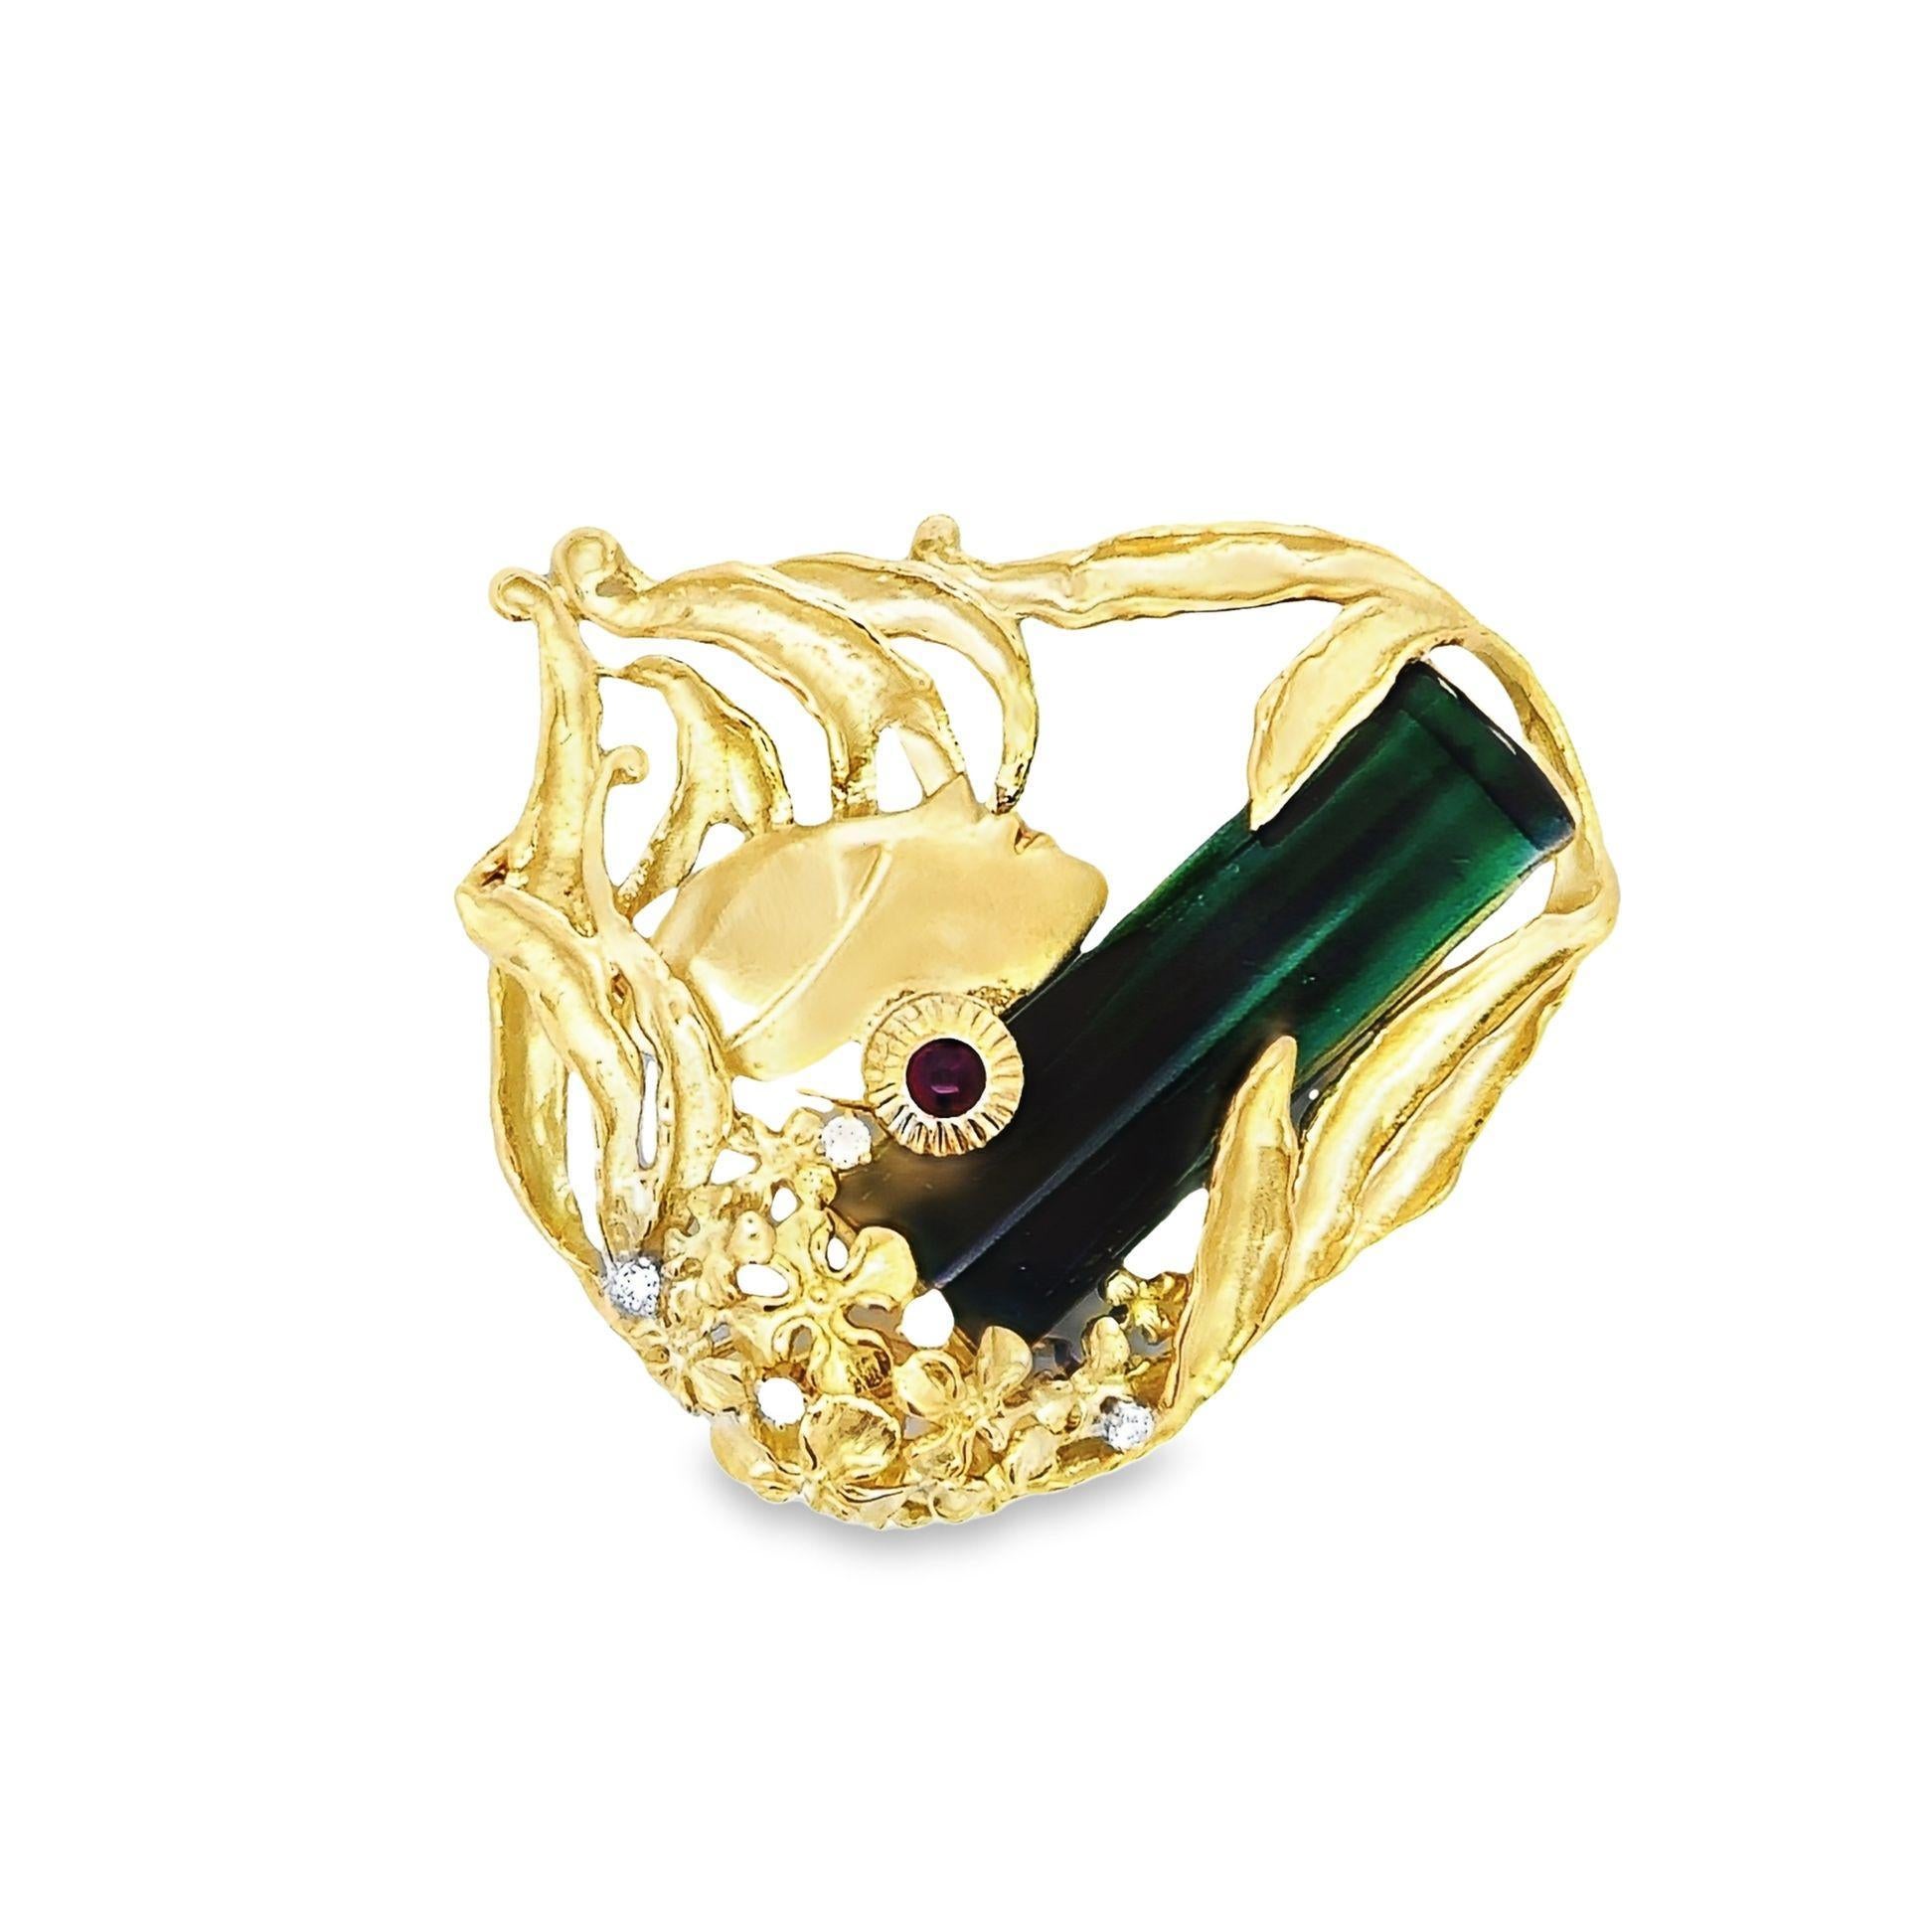 Crafted in 18k yellow gold, this brooch inspired by the Art Nouveau era is suitable for a glamorous outfit or for casual daily wear. It features an incredible green tourmaline of 27.16 carats which is surrounded by 0.15 carats of rubies and 0.12